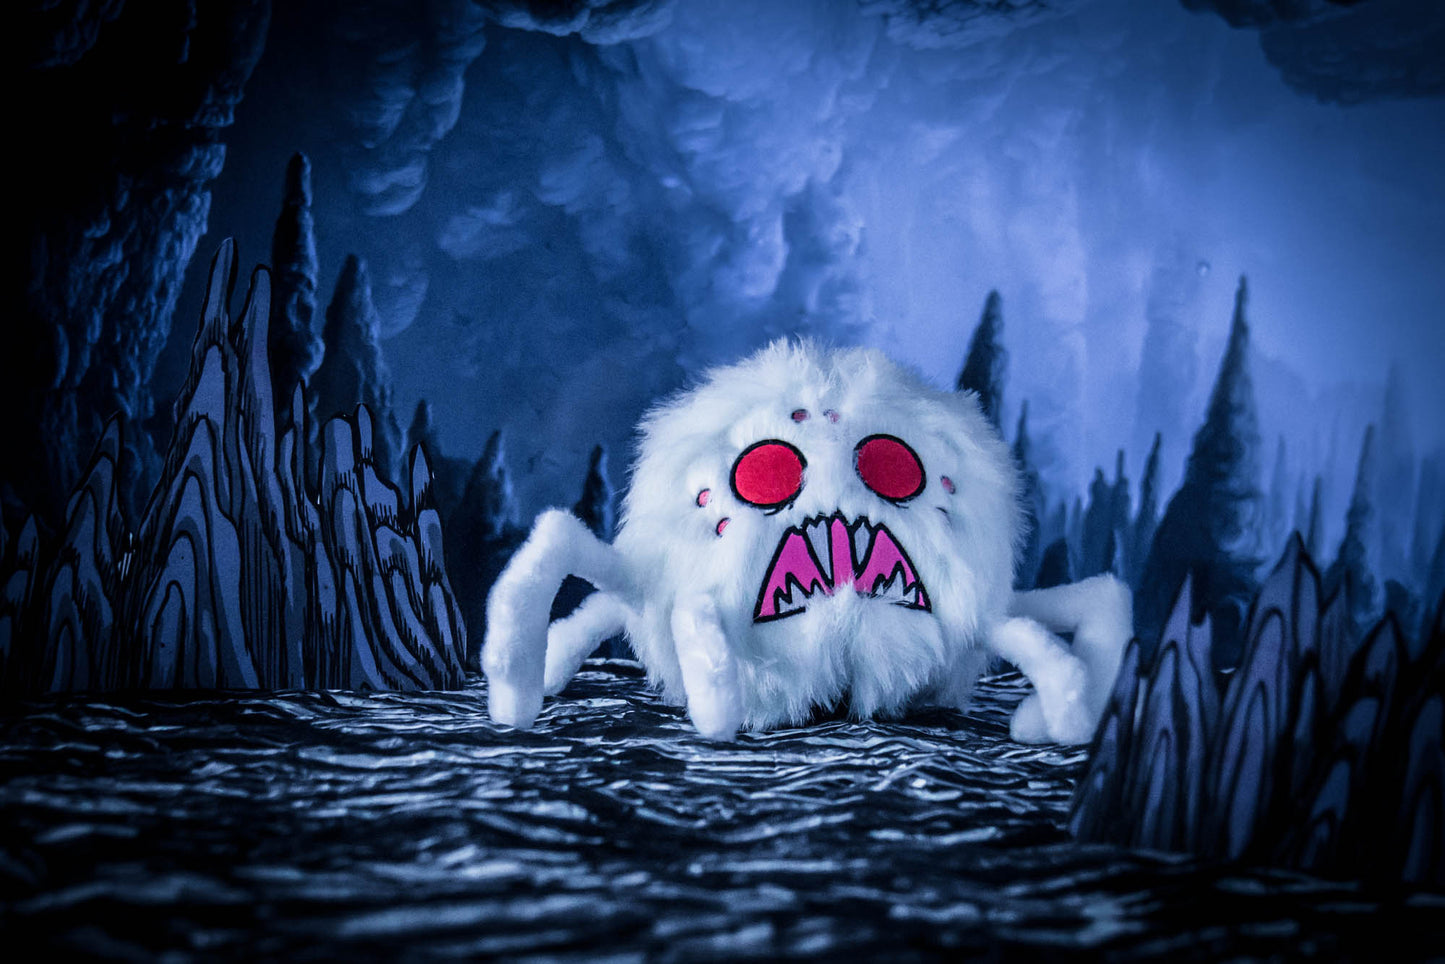 Don't Starve White Spider in a Cave